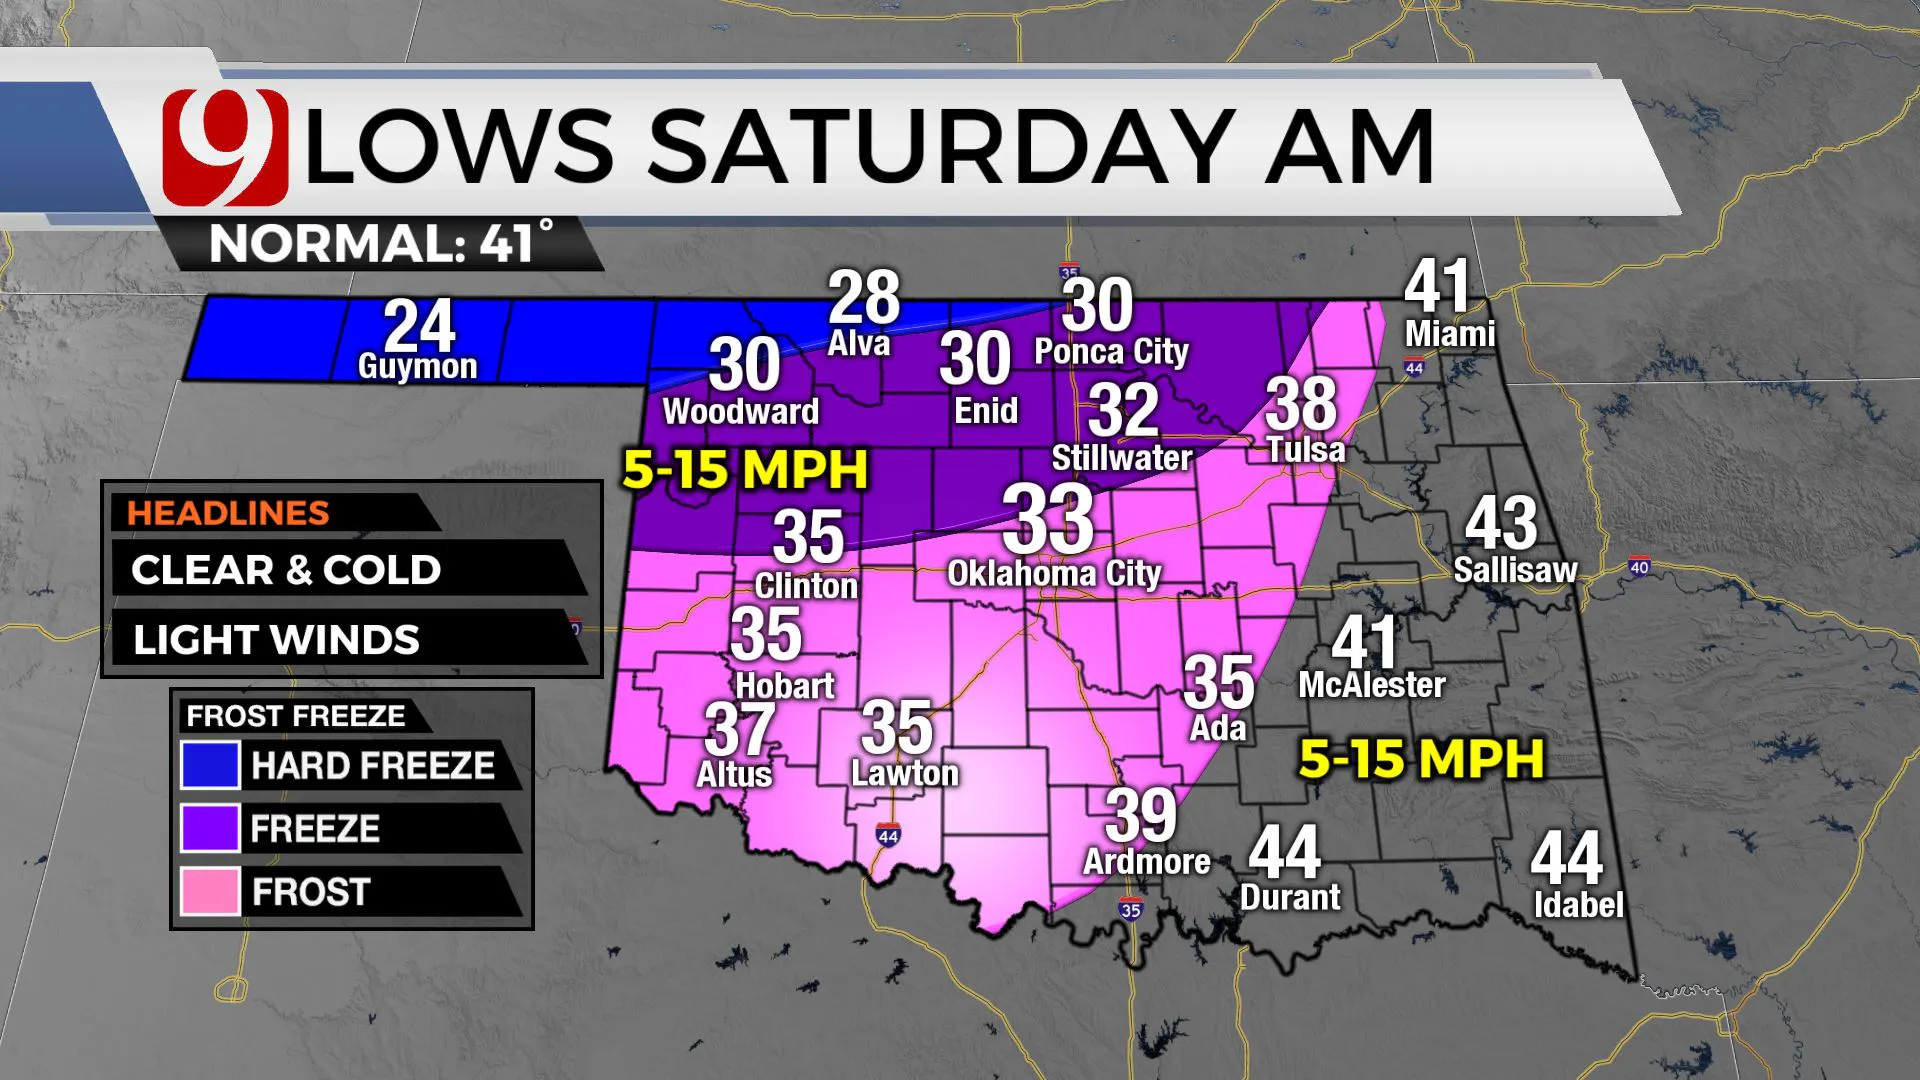 Low temps for Saturday morning.